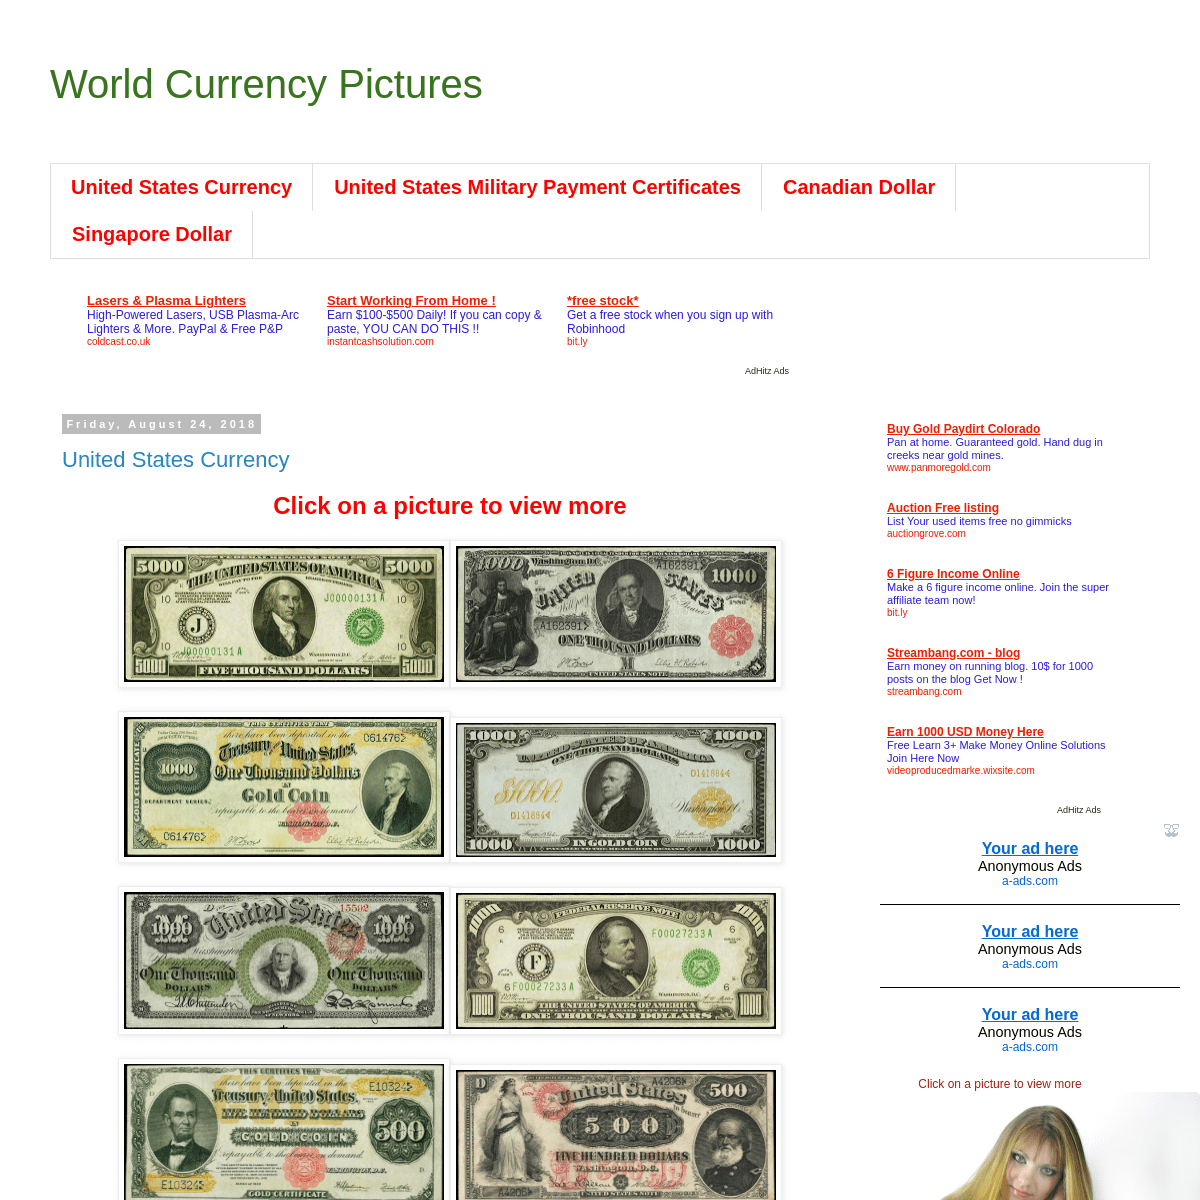 A complete backup of worldcurrencypictures.blogspot.com